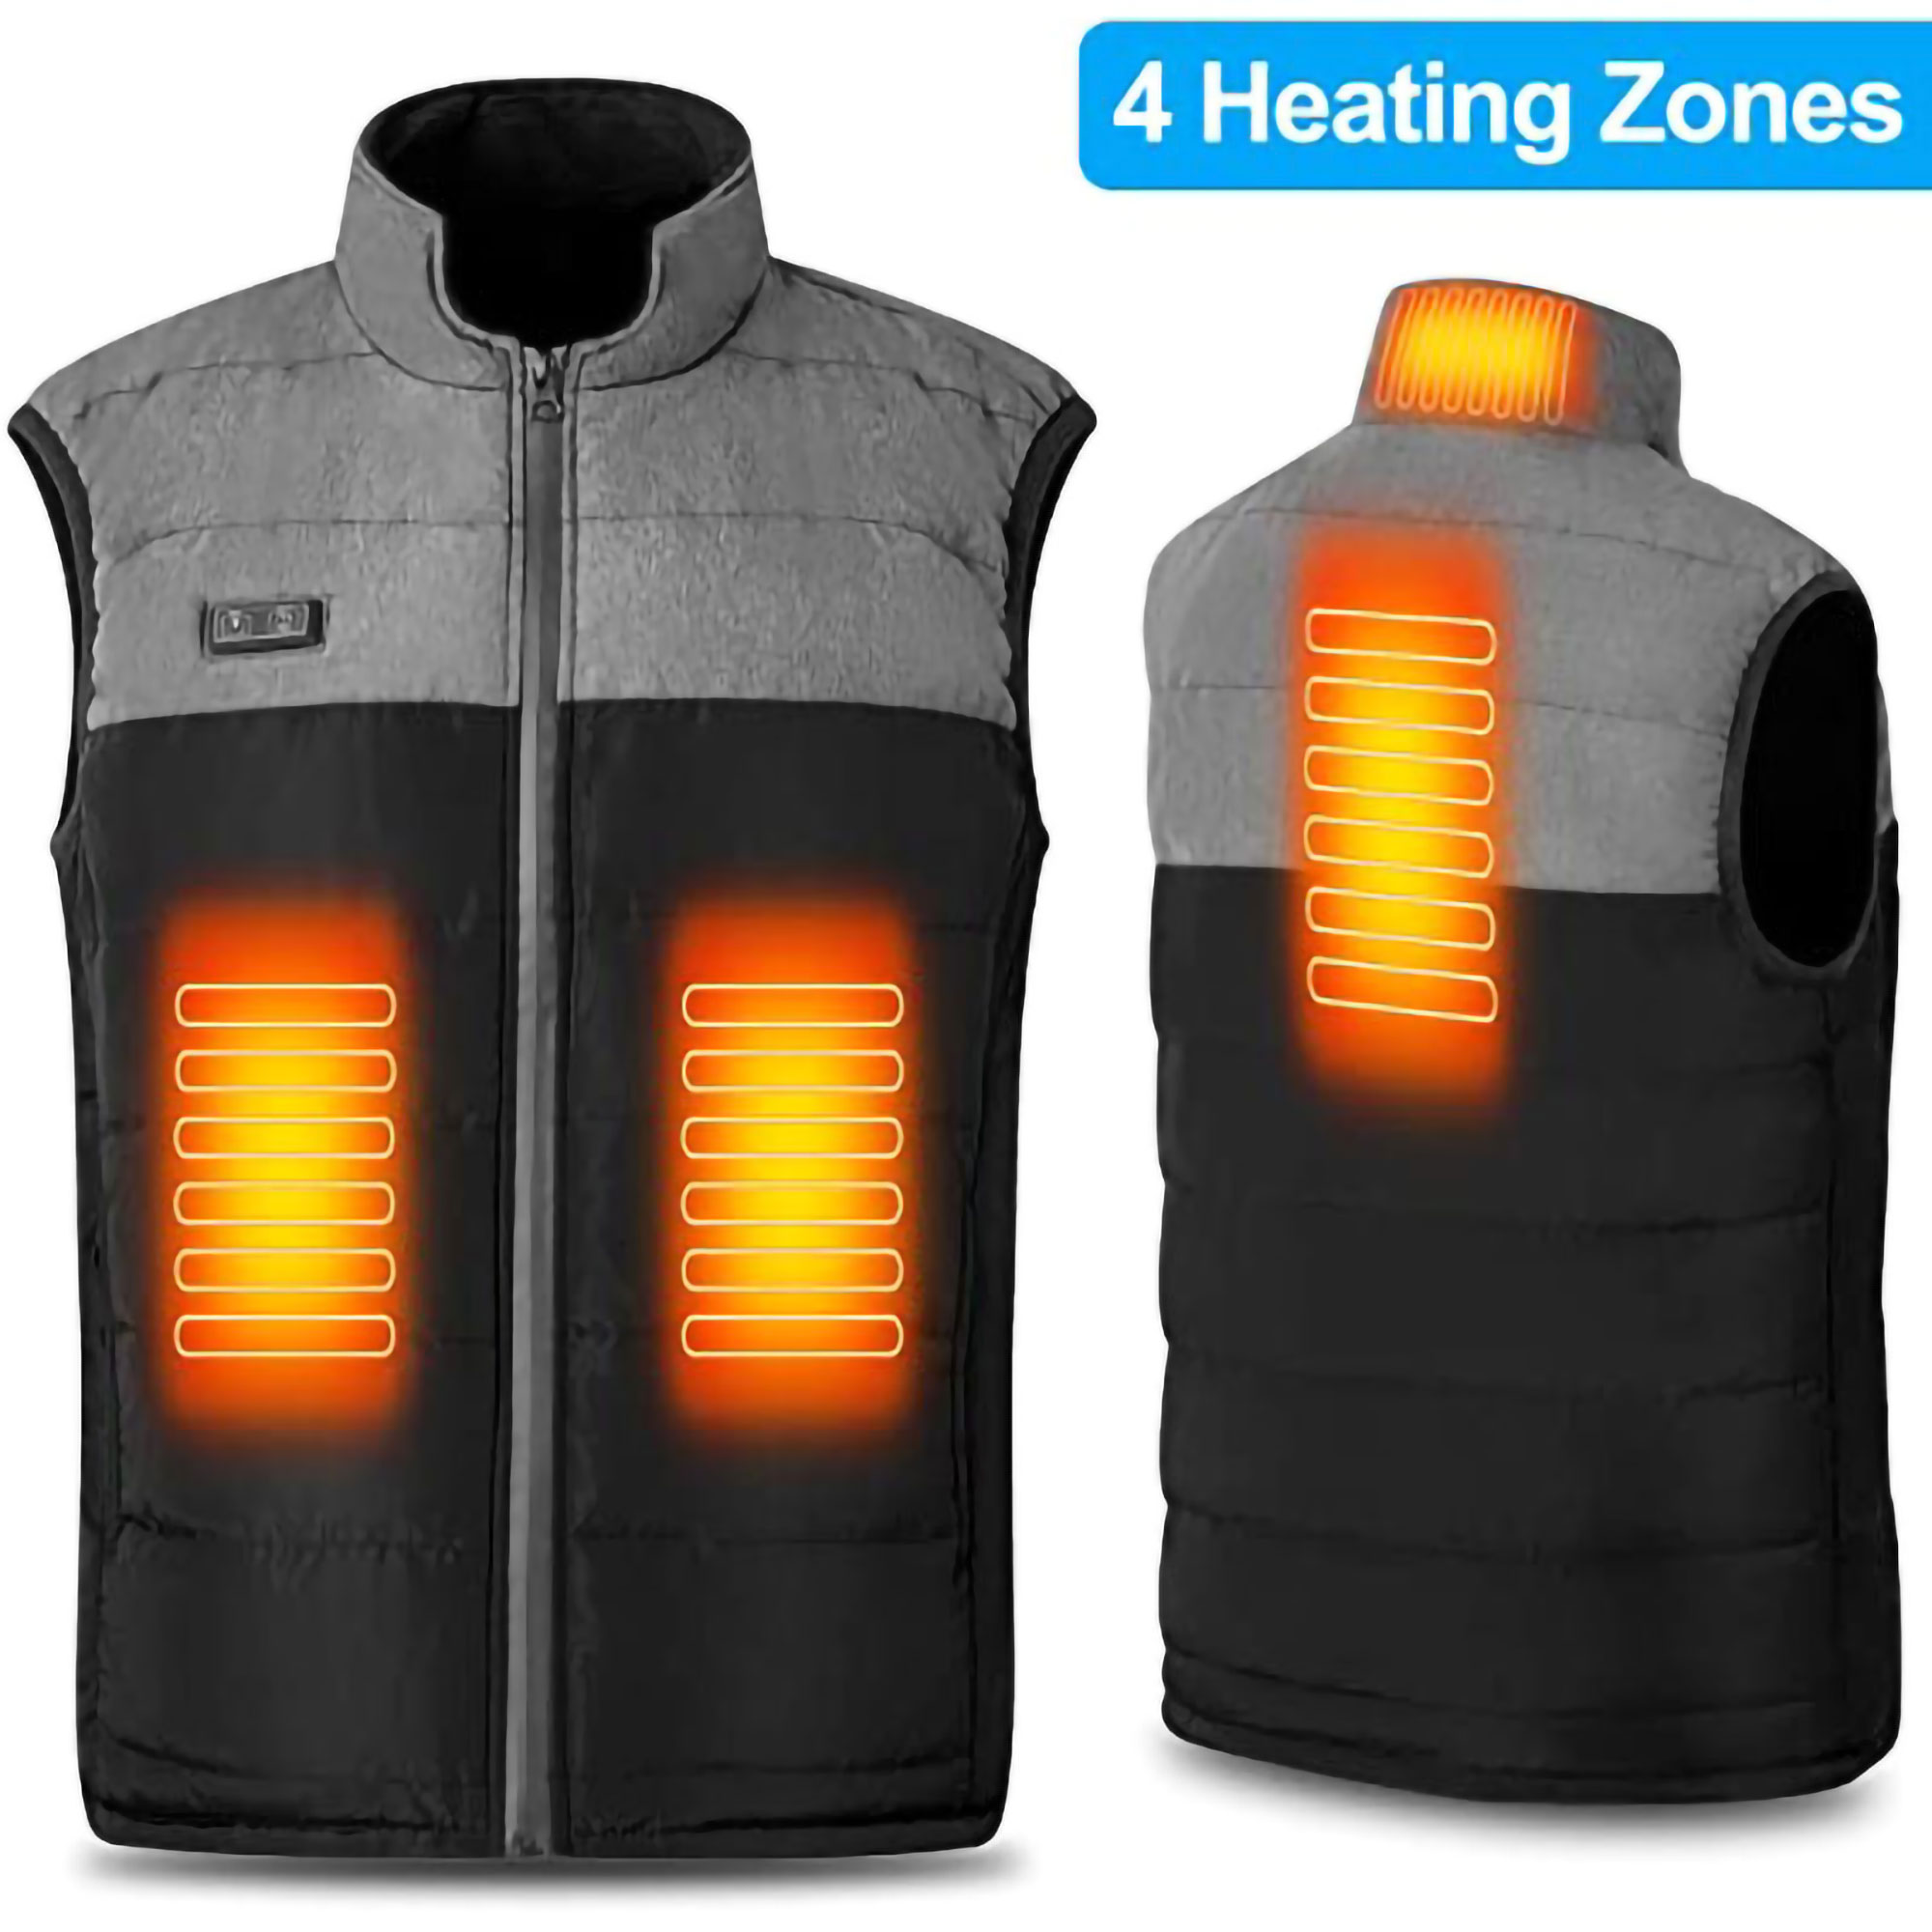 Men's Washable Heated Jacket Heating Coat Couple Thermal Winter Vest Warm Up Windproof For Outdoor Sports Double Button S-3XL - image 3 of 11